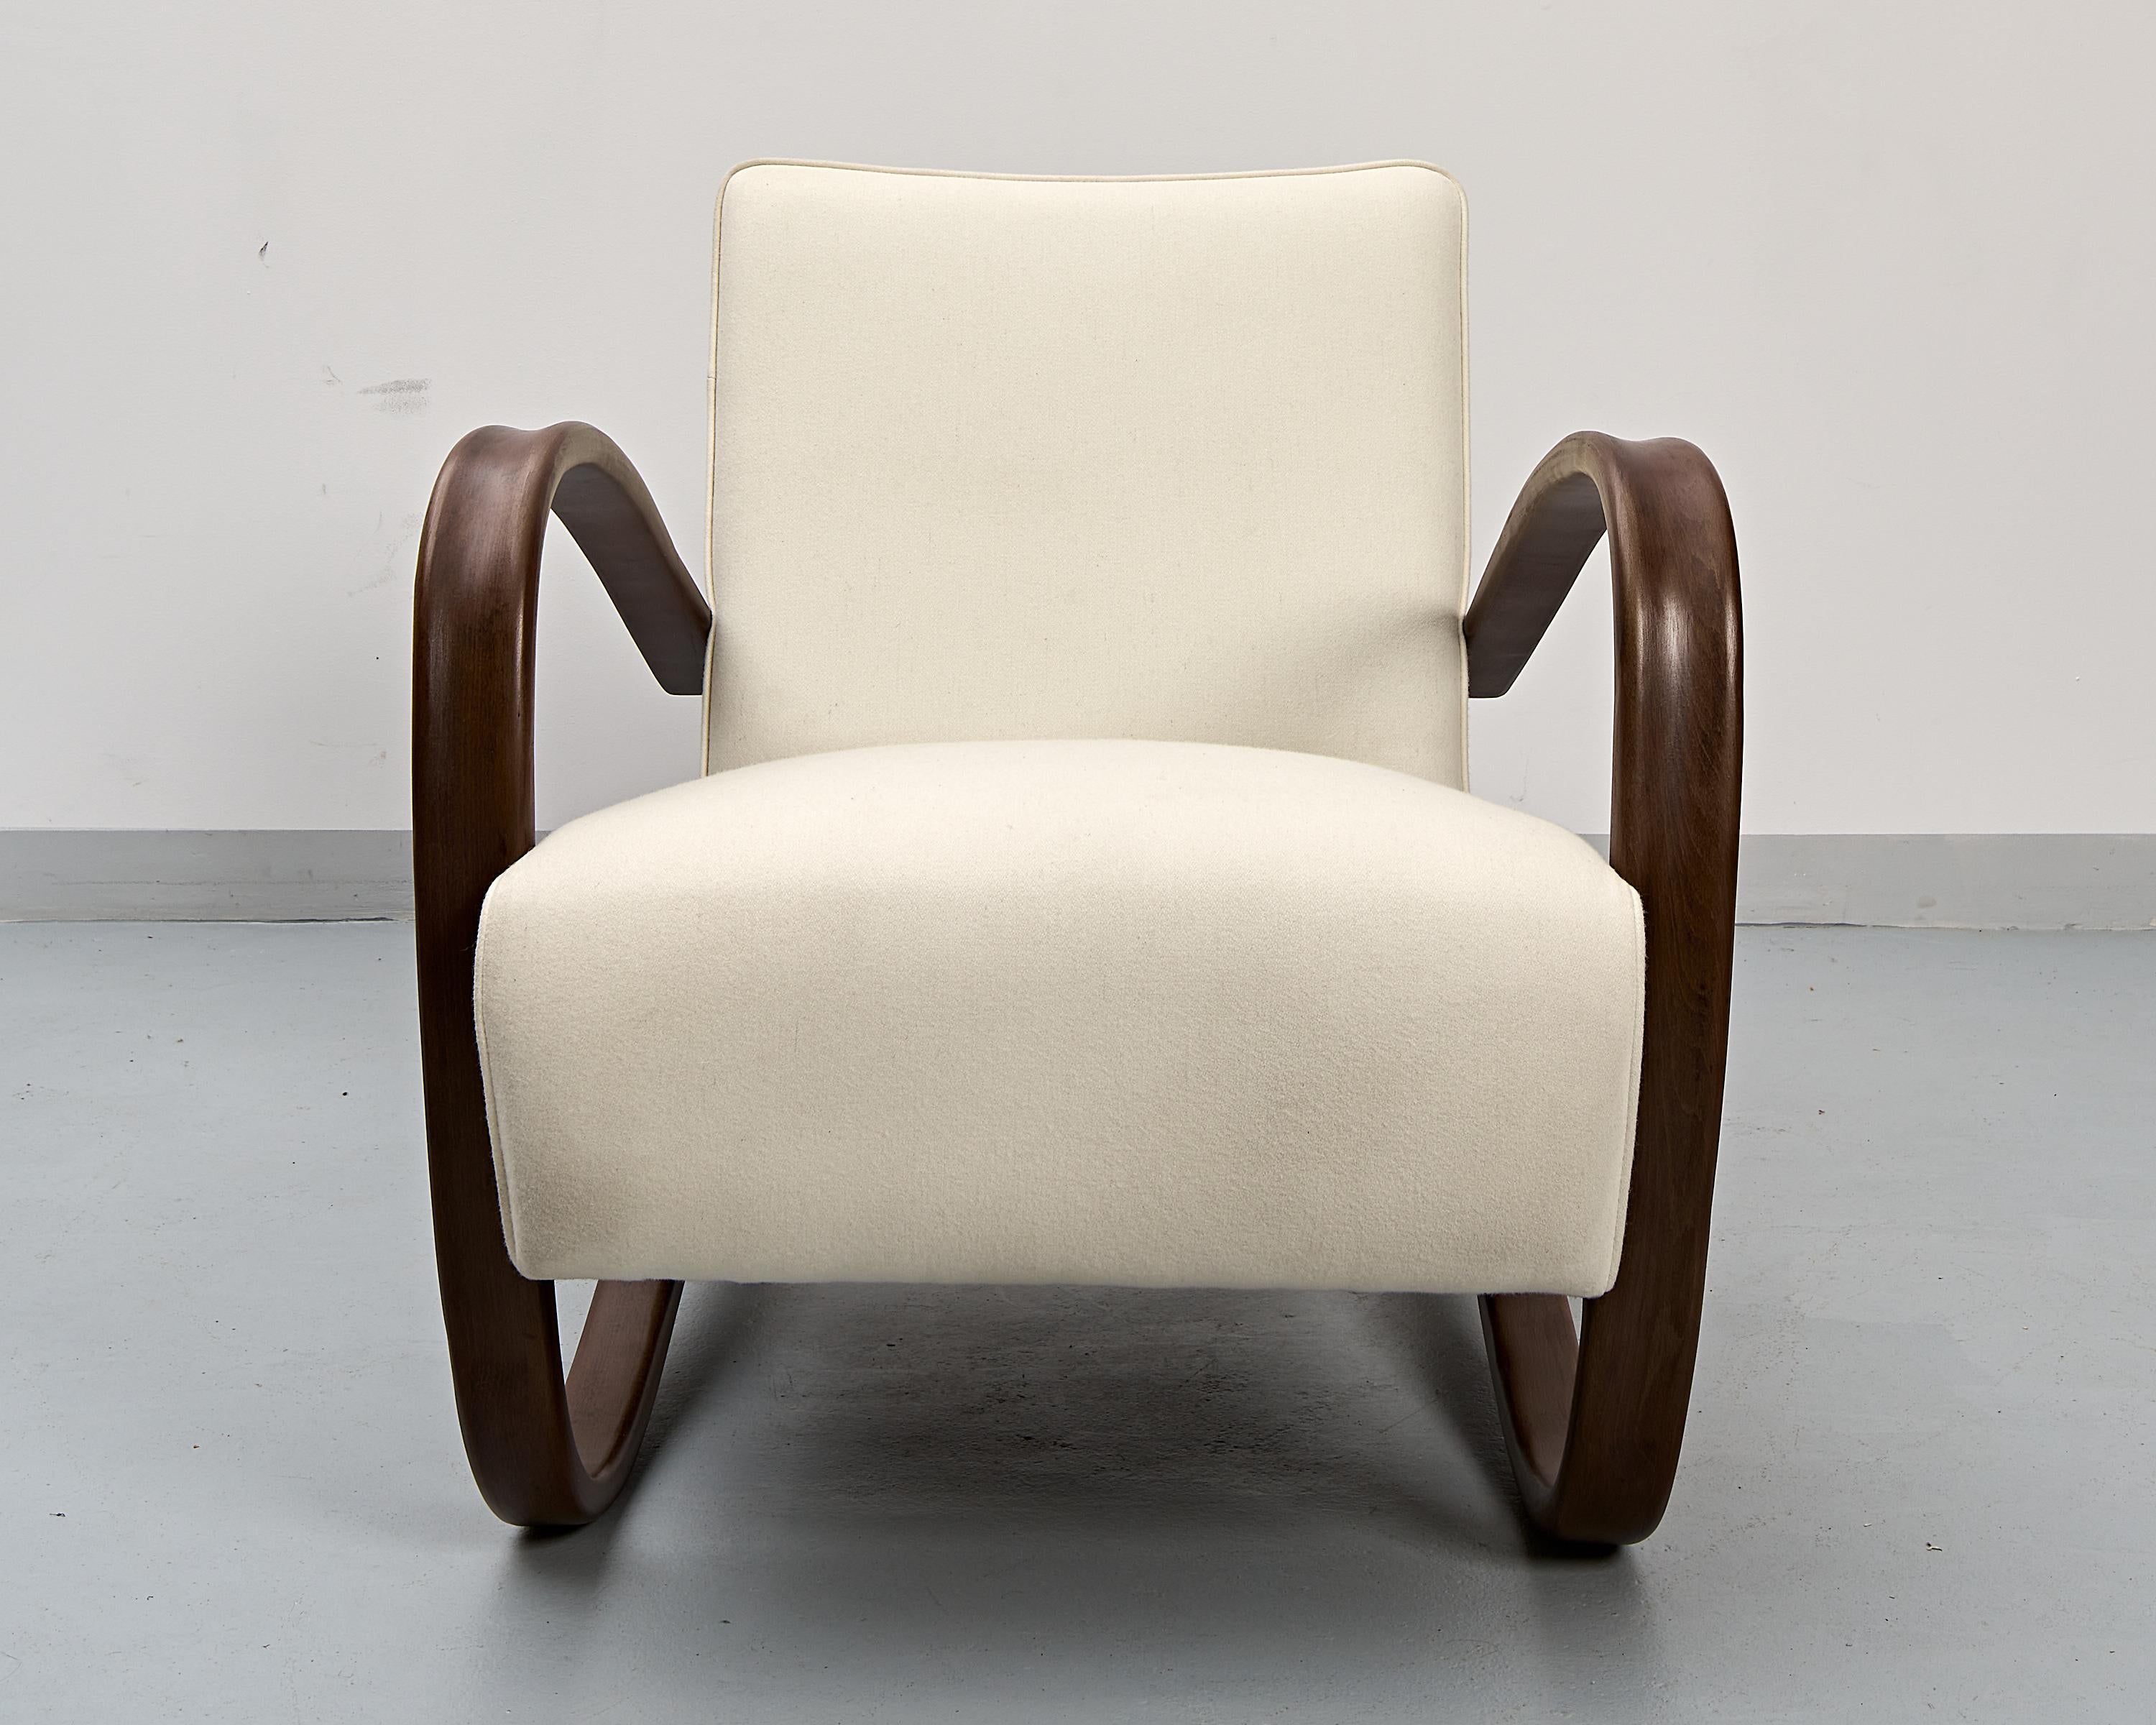 The legendary Halabala H-269 chair designed by Jindřich Halabala circa 1930. One of the most well known czechoslovakian designs in the world.
Bent beechwood frame restored to a half matt finish. Seating recreated and covered in an ivory artificial